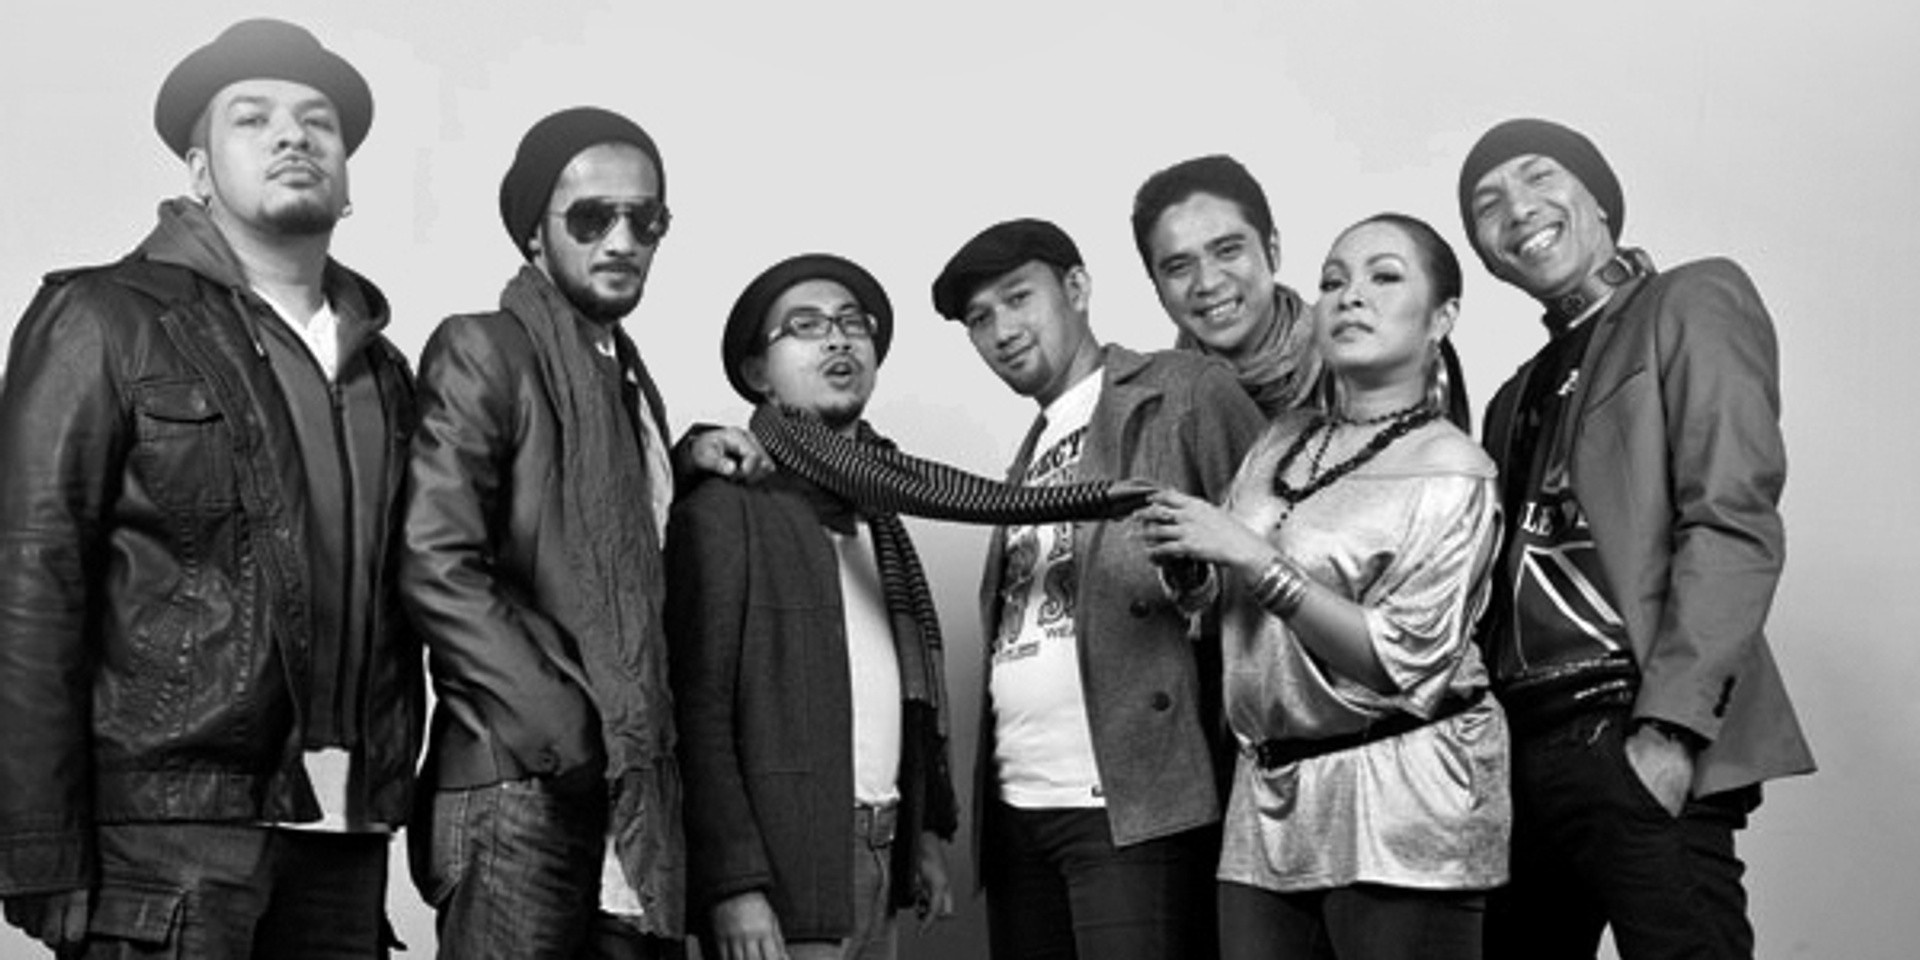 Going 20 years strong, The Groove return with religious track 'Tuhan Di Hati Kita' — watch